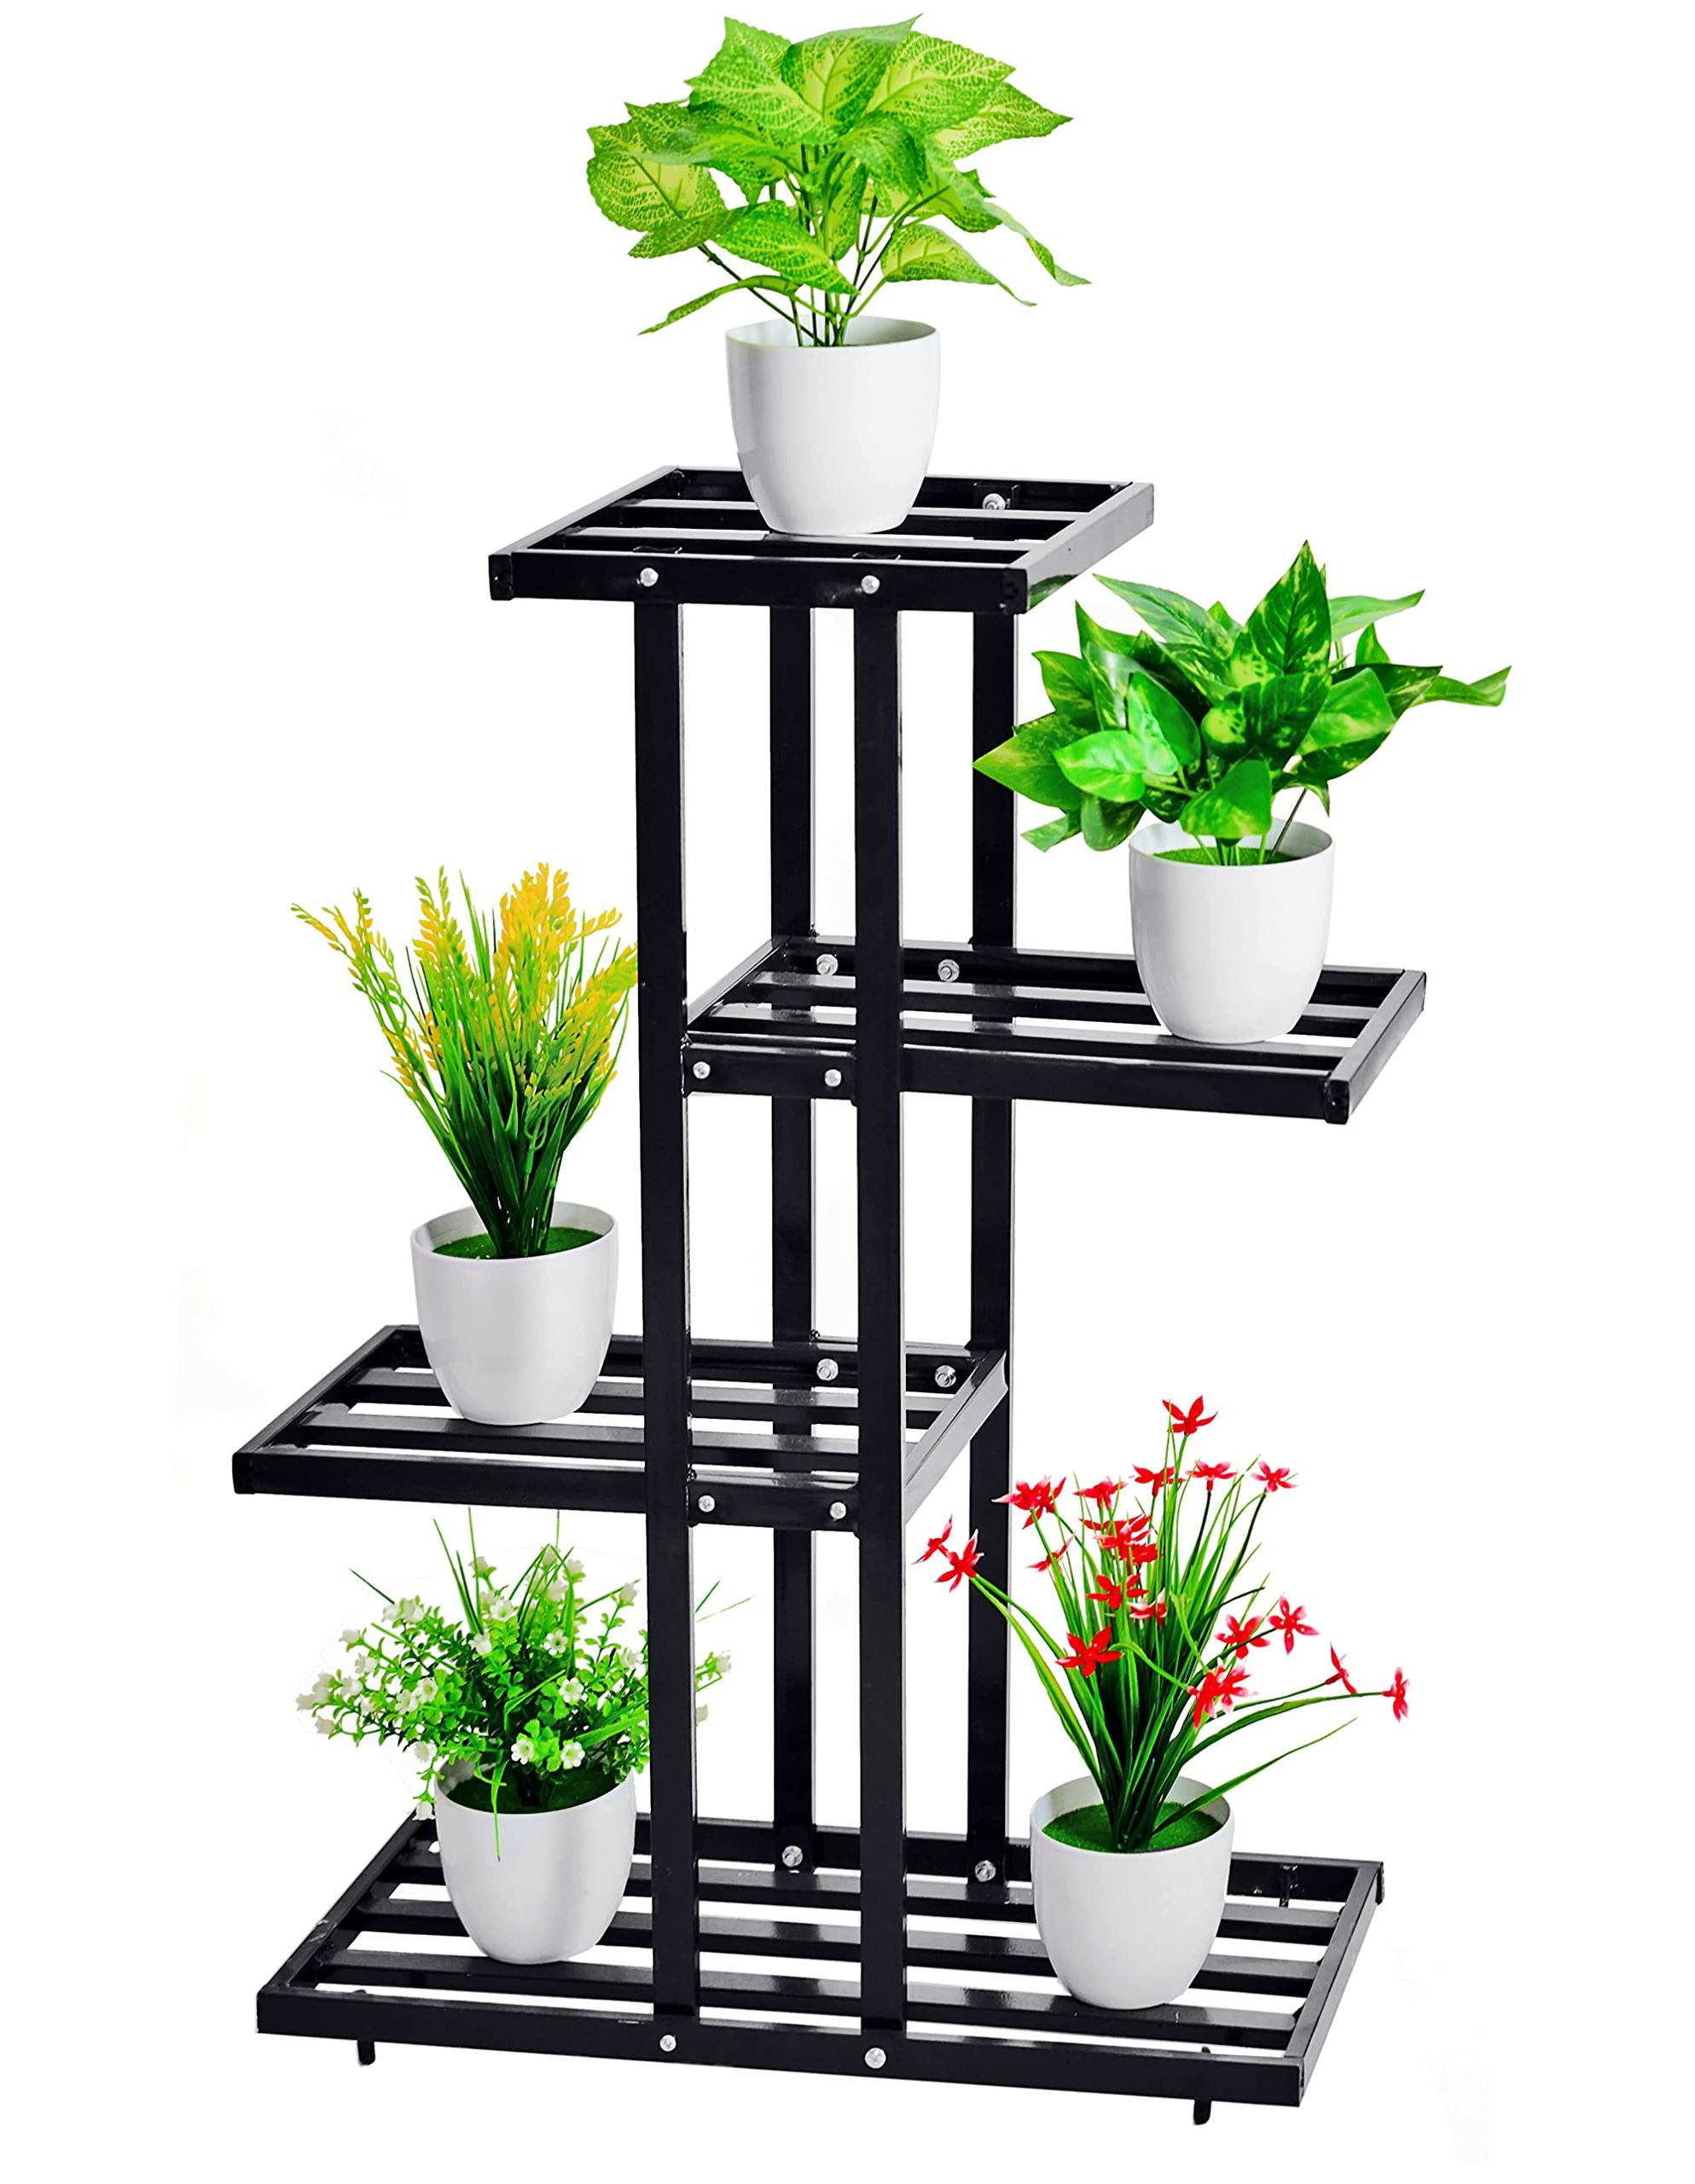 2019 Four Tier Metal Plant Stands Inside Amazon: Yemuny 4 Tier Metal Plant Stand Shelf 5 Potted, Flower Pot  Holder Planter Rack Organizer Multiple Tall Indoor Outdoor For Patio  Balcony Home Office Garden Living Room (black) : Patio, Lawn (View 3 of 10)